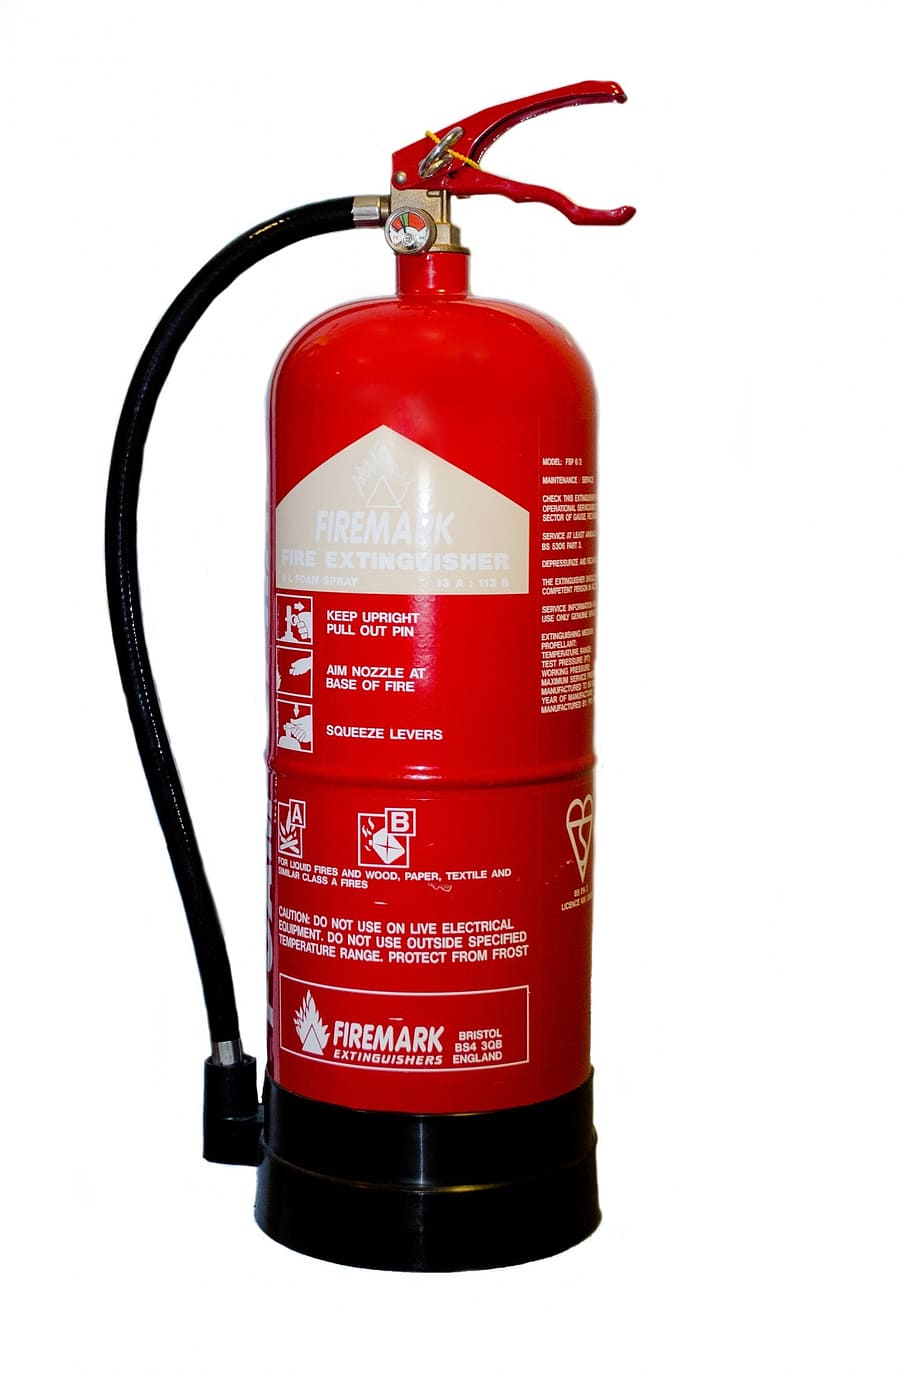 red and black Firemark fire extinguisher on white surface, alarm